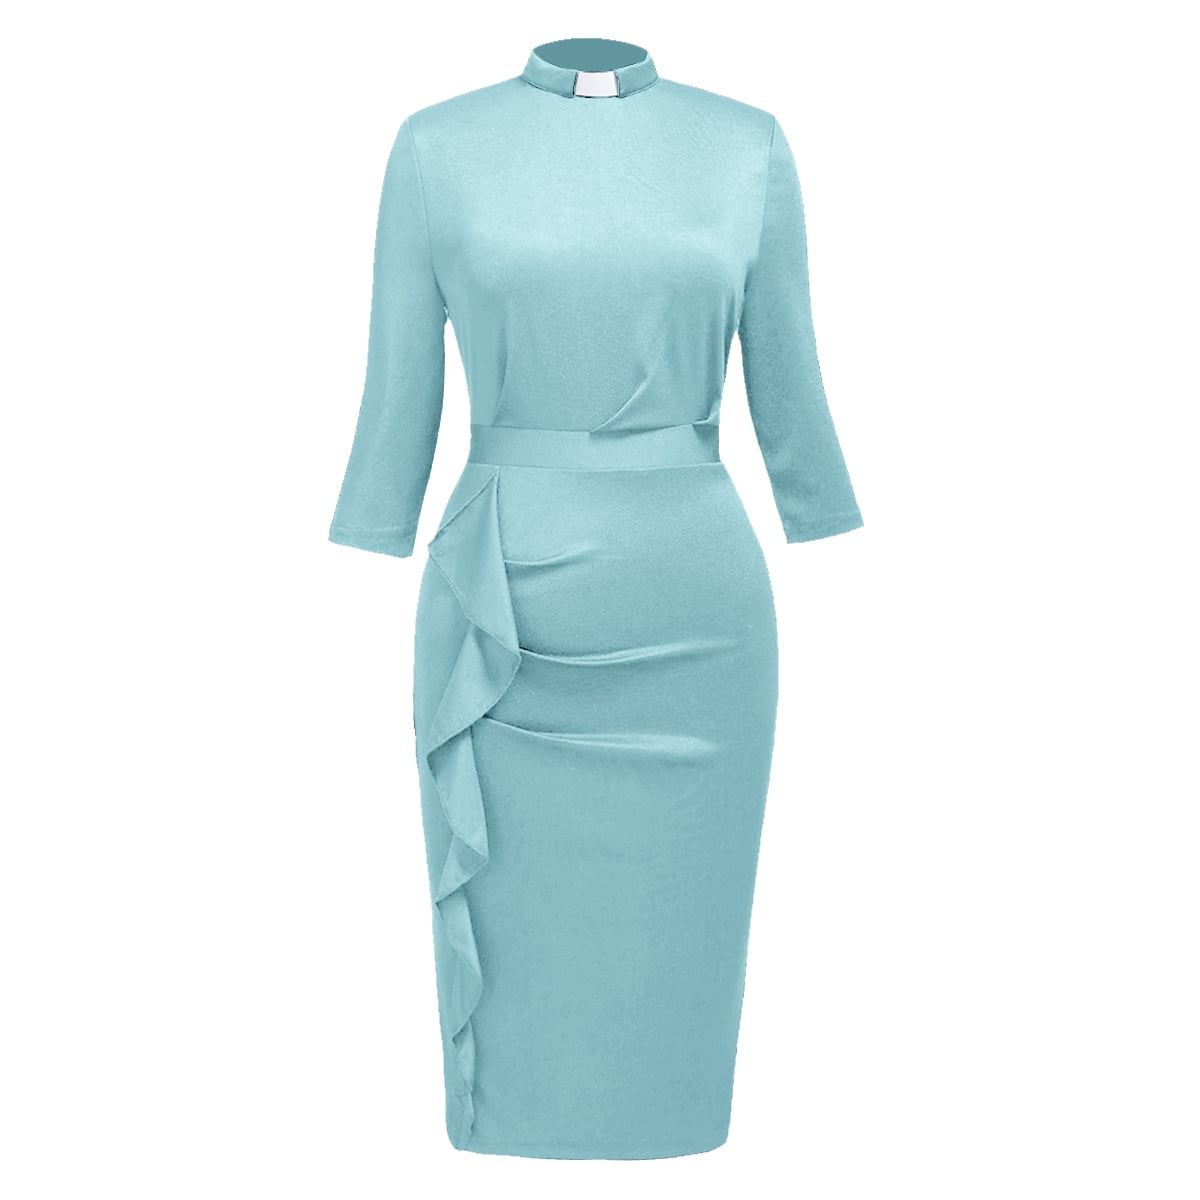 GRACEART Clergy women's Ruffle Midi Pencil Dress with removable Tab ...